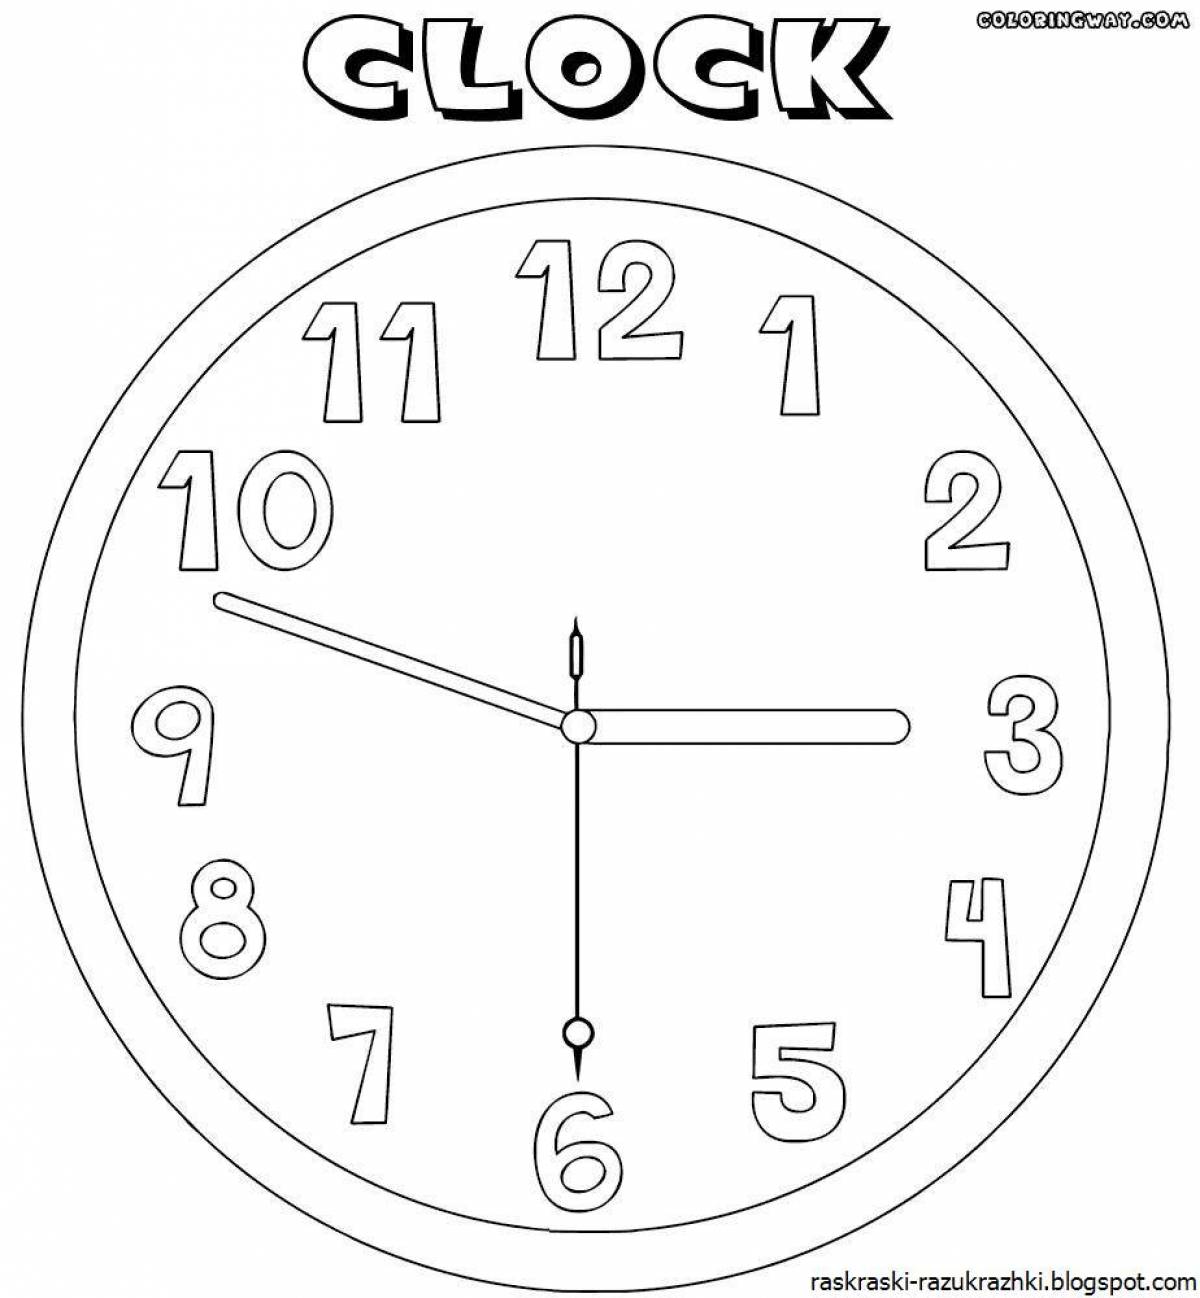 Coloring clock for kids